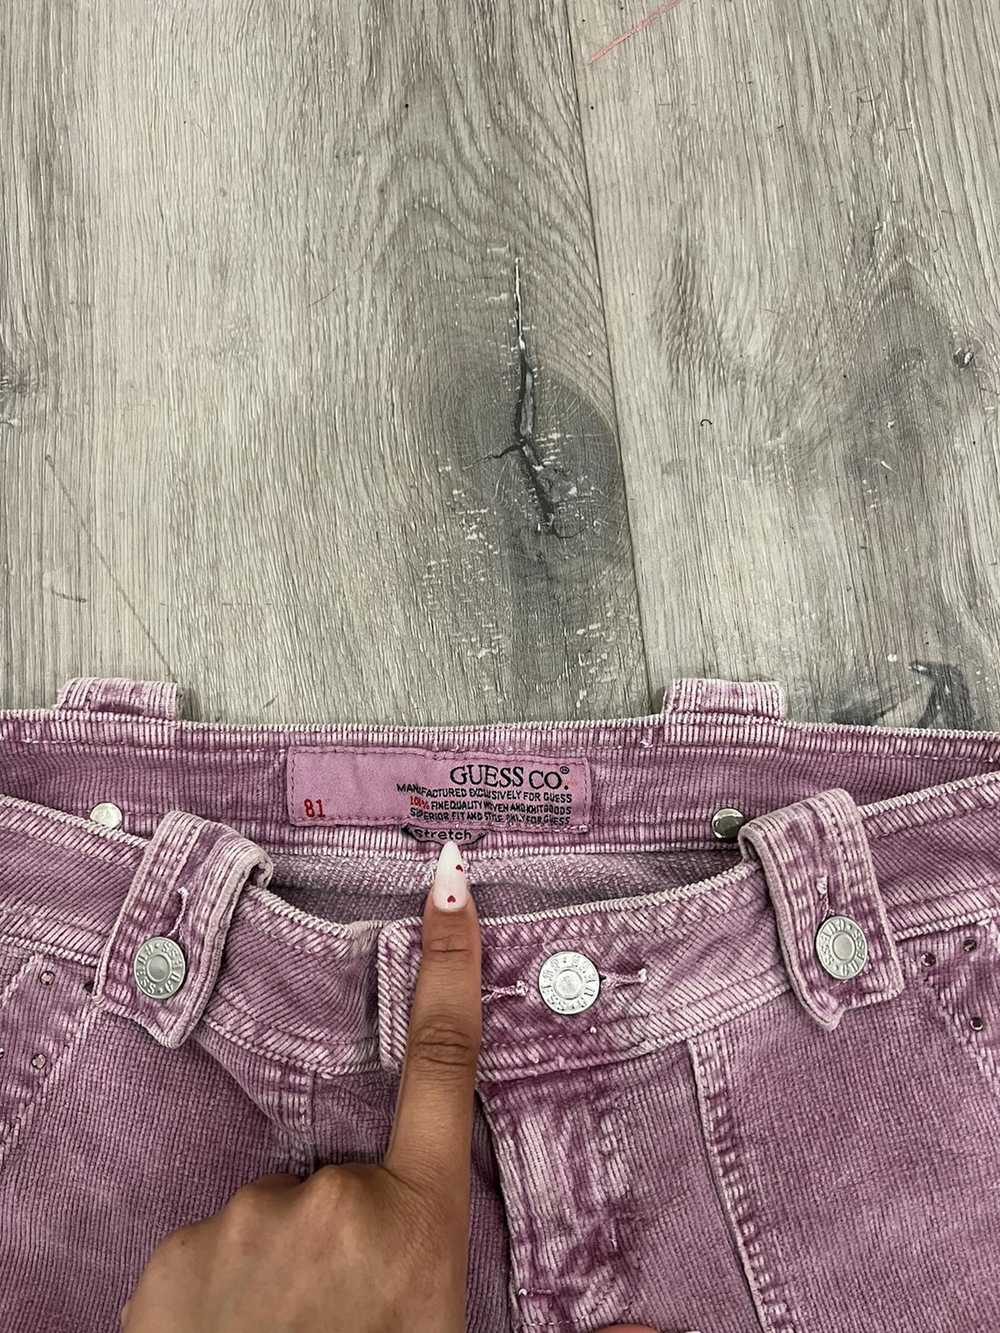 Guess × Vintage Pink Guess Bootcut Jeans - image 2